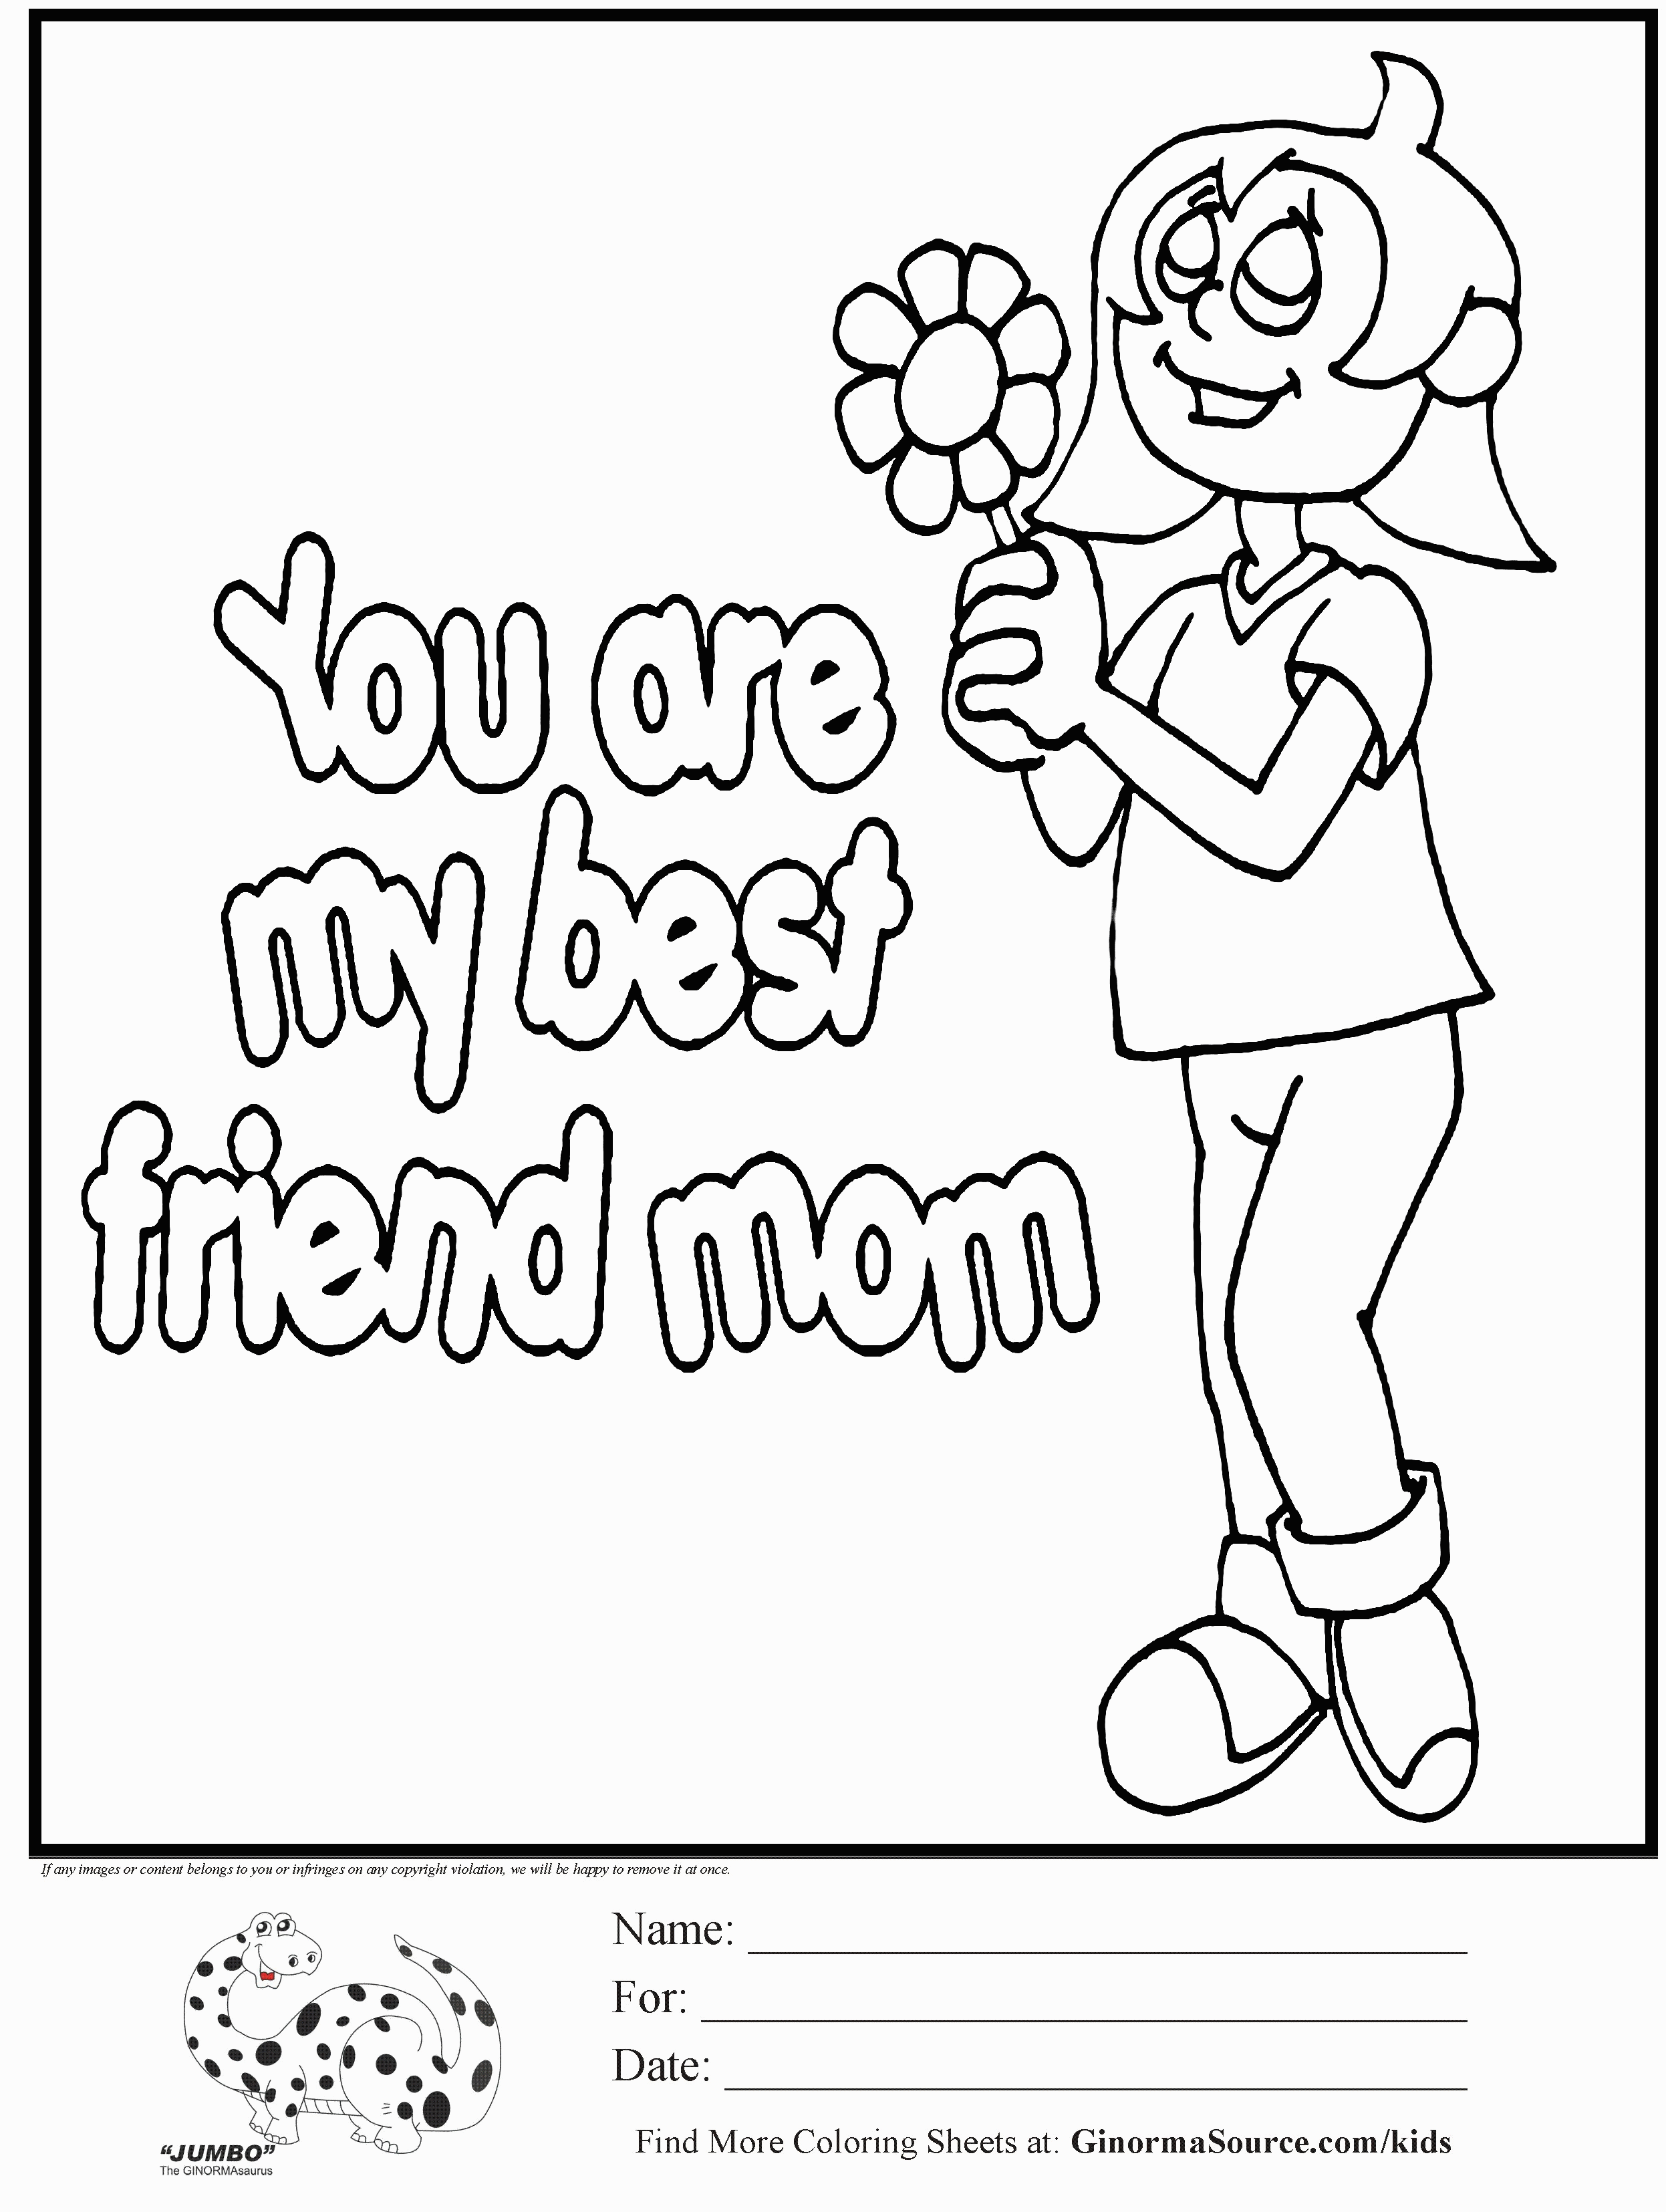 Number 1 Mom Coloring Pages Mom Coloring Sheets. Kids Coloring